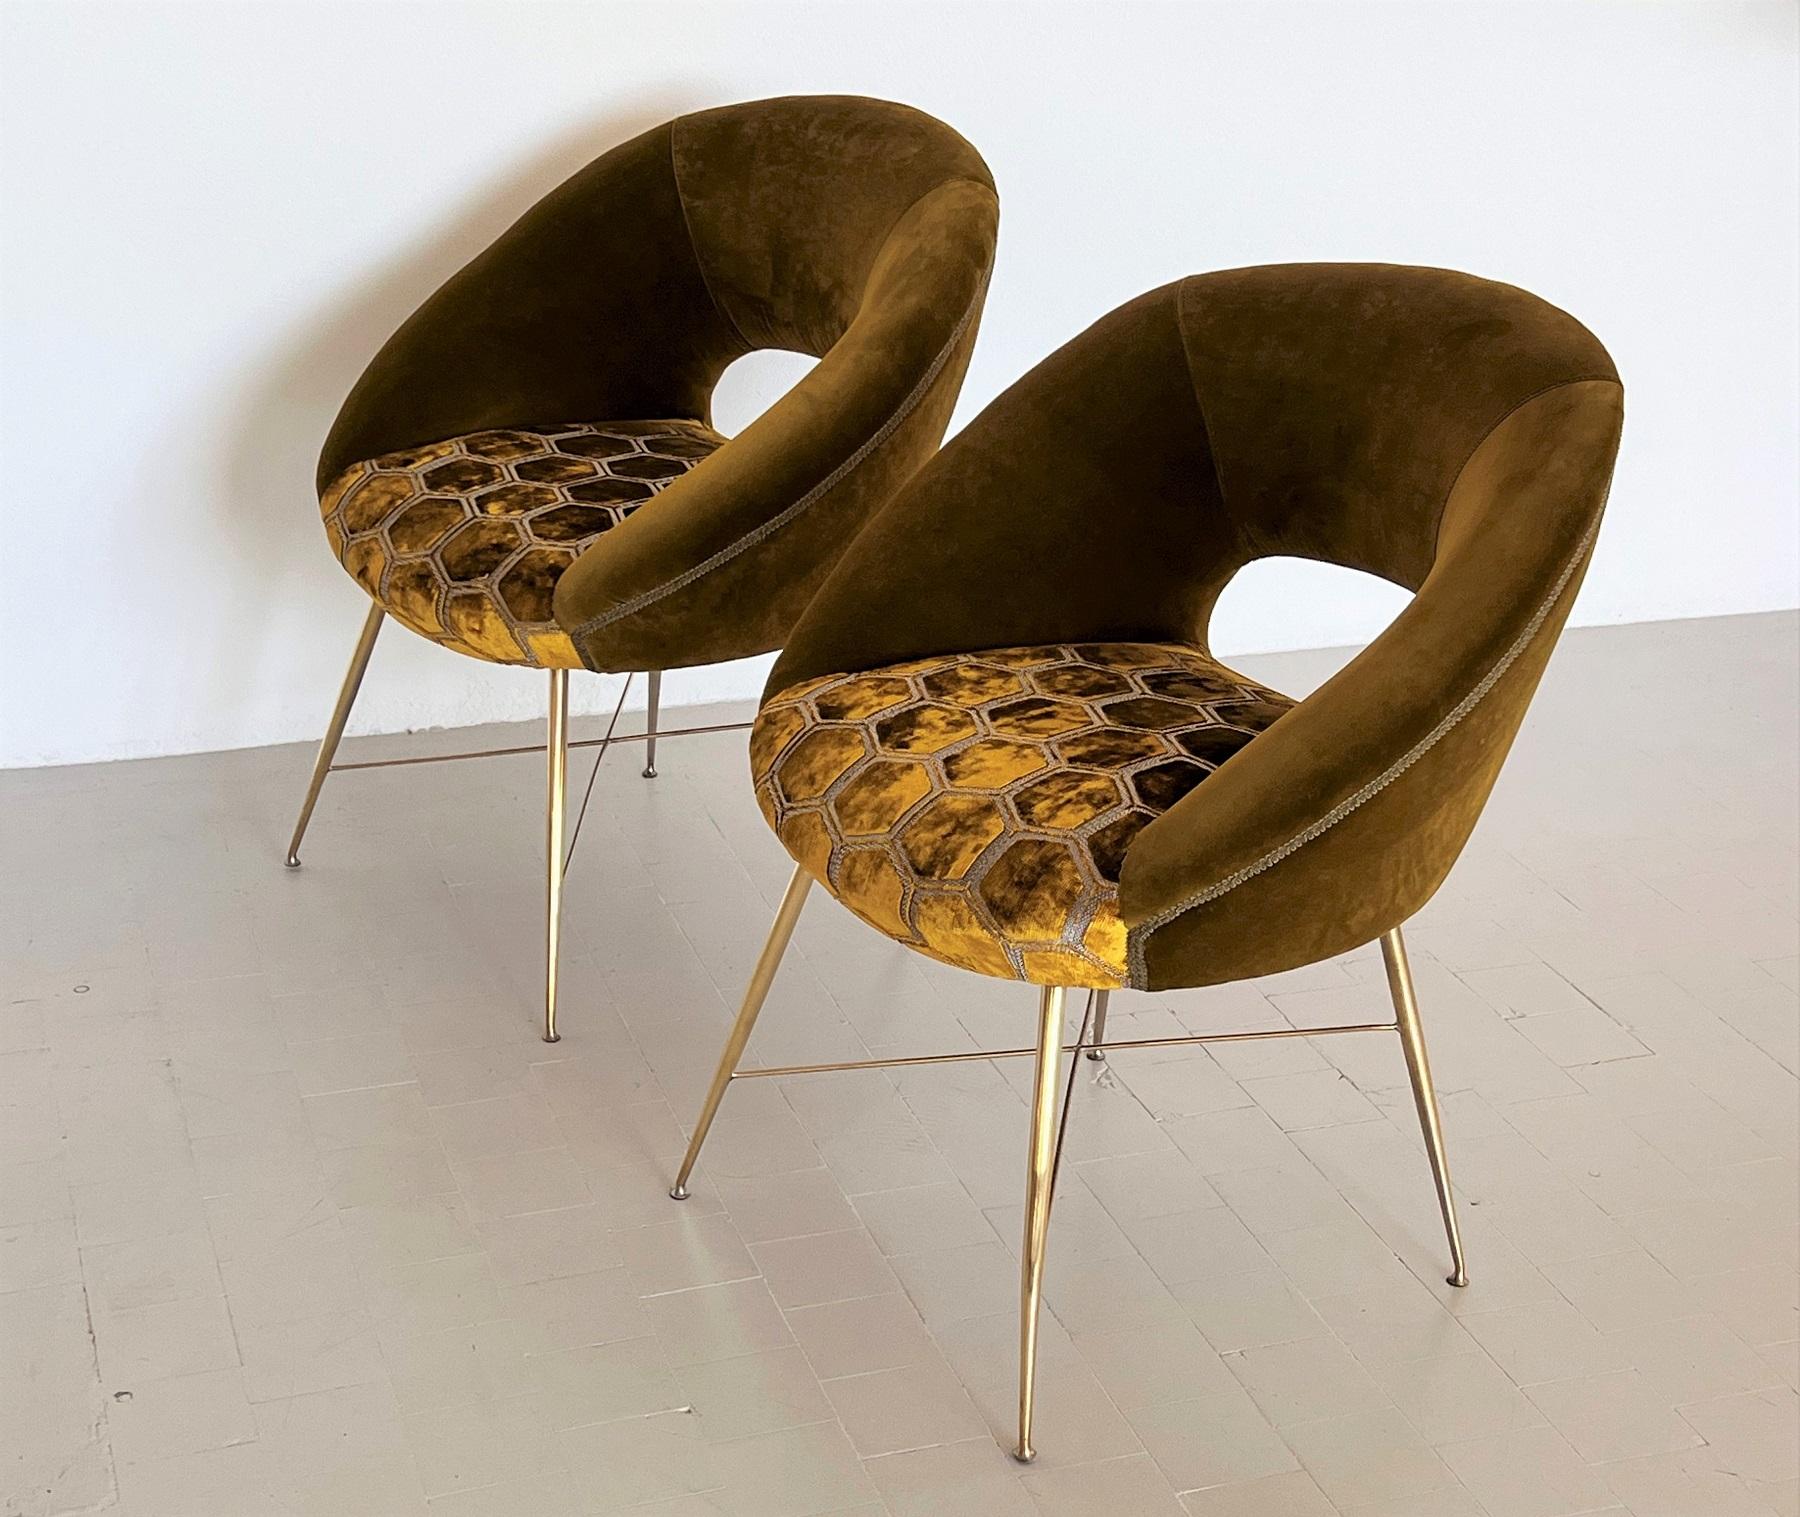 Mid-20th Century Silvio Cavatorta Pair of Chairs with Brass Legs Re-upholstered in Velvet, 1950s For Sale